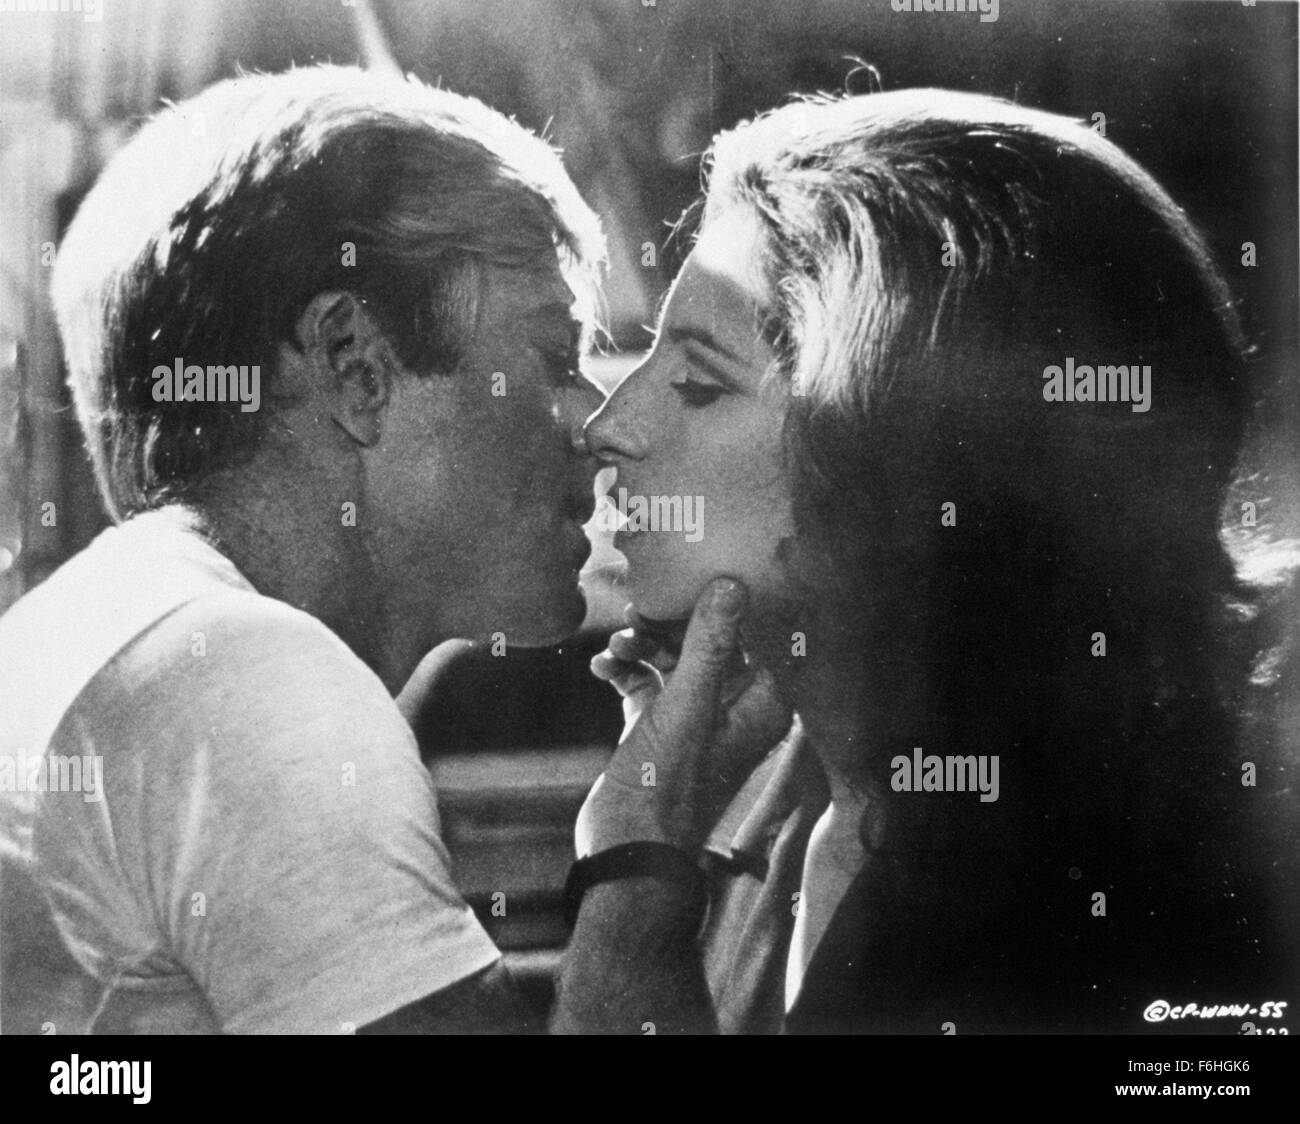 1973, Film Title: WAY WE WERE, Director: SYDNEY POLLACK, Studio: COLUMBIA, Pictured: SYDNEY POLLACK, ROBERT REDFORD, ROMANCE. (Credit Image: SNAP) Stock Photo